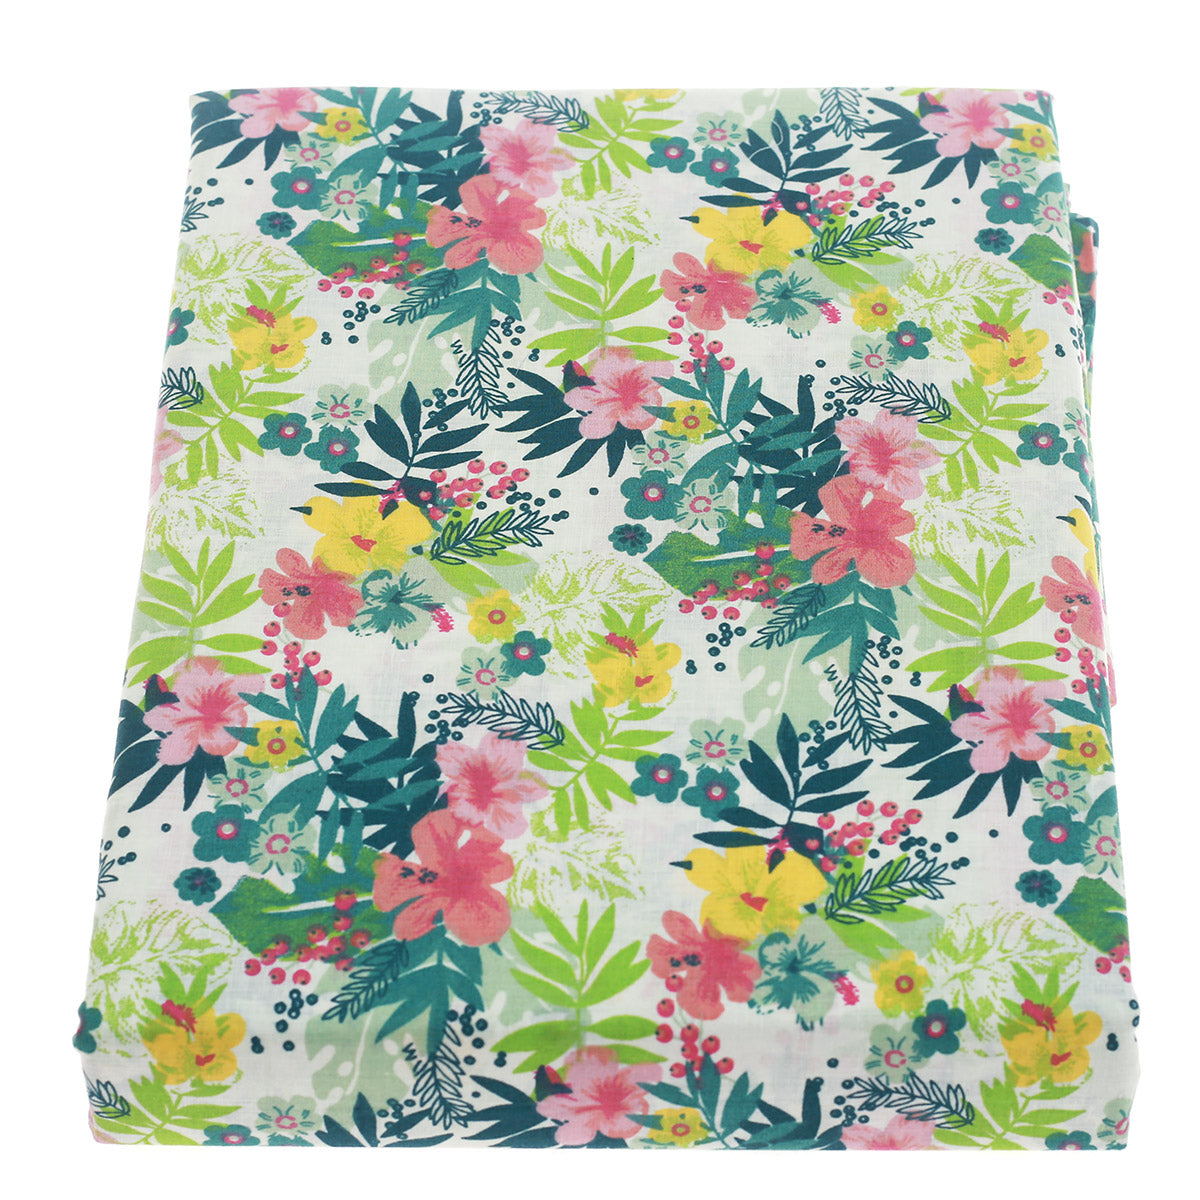 TROPICAL FOLIAGE DOUBLE BED SHEET 96X102"